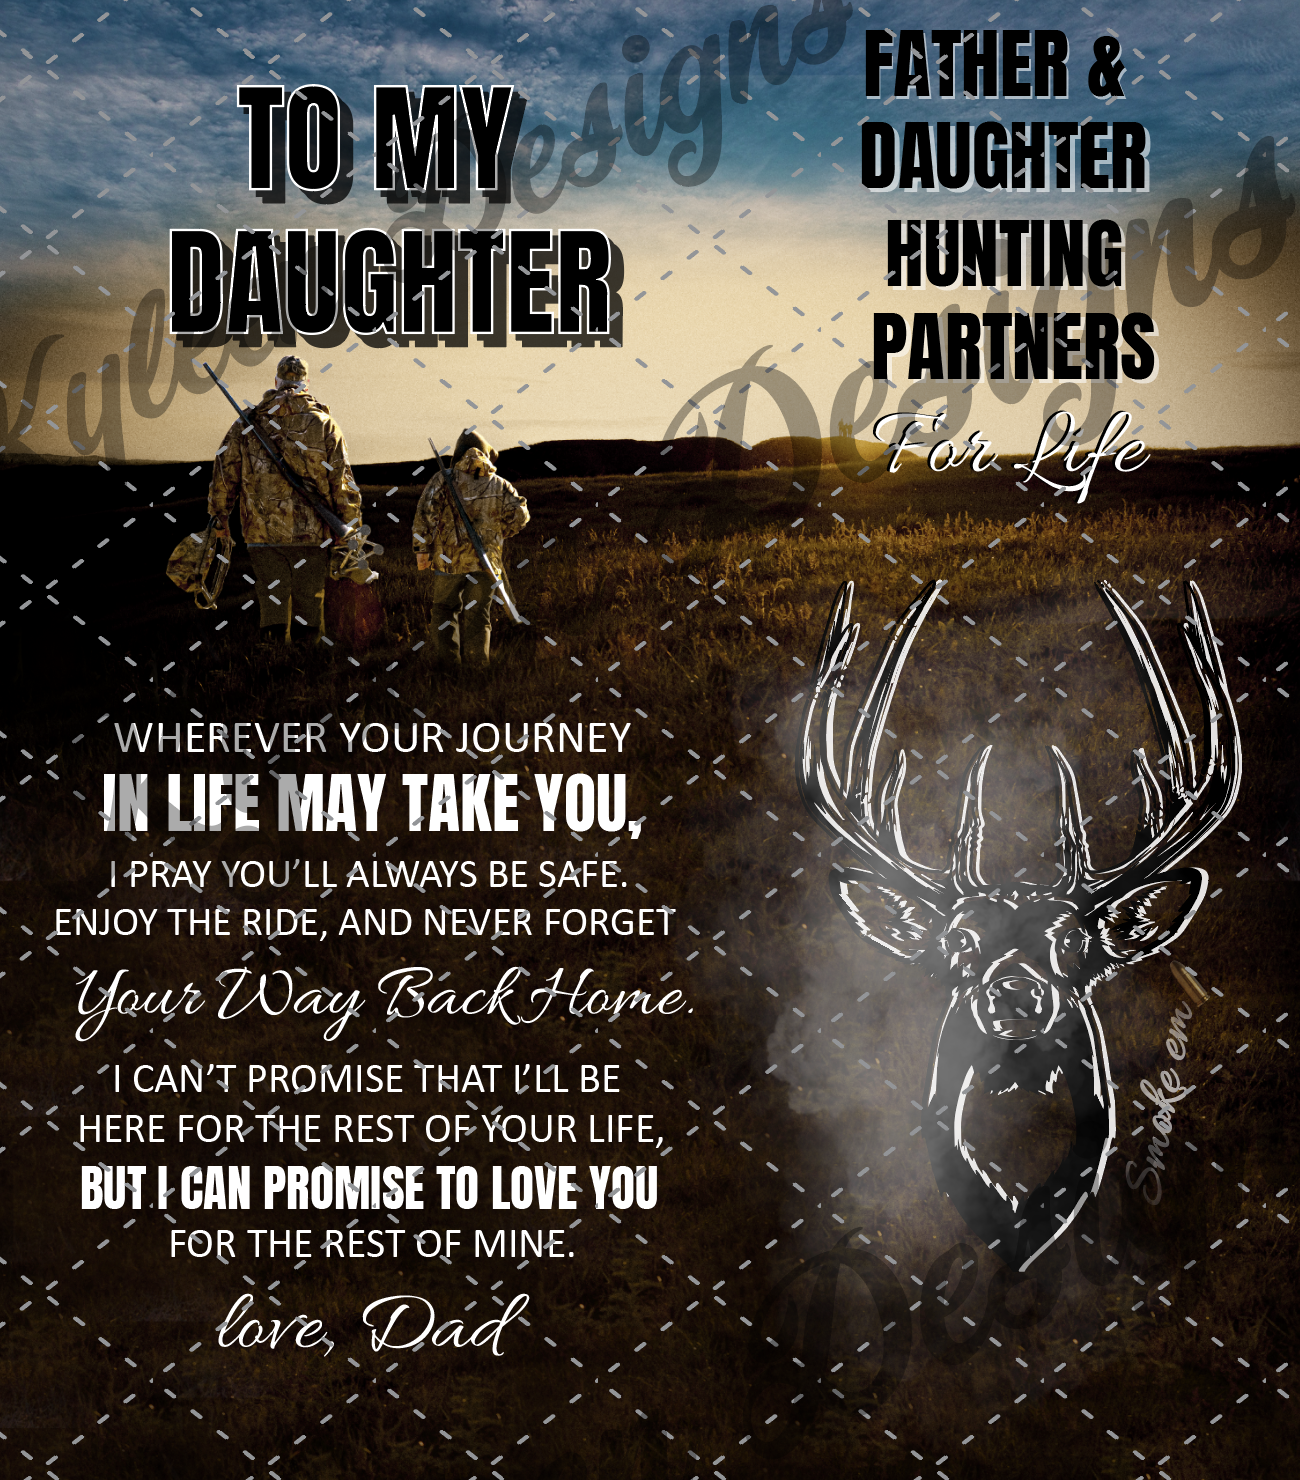 To my daughter hunting partners digital file